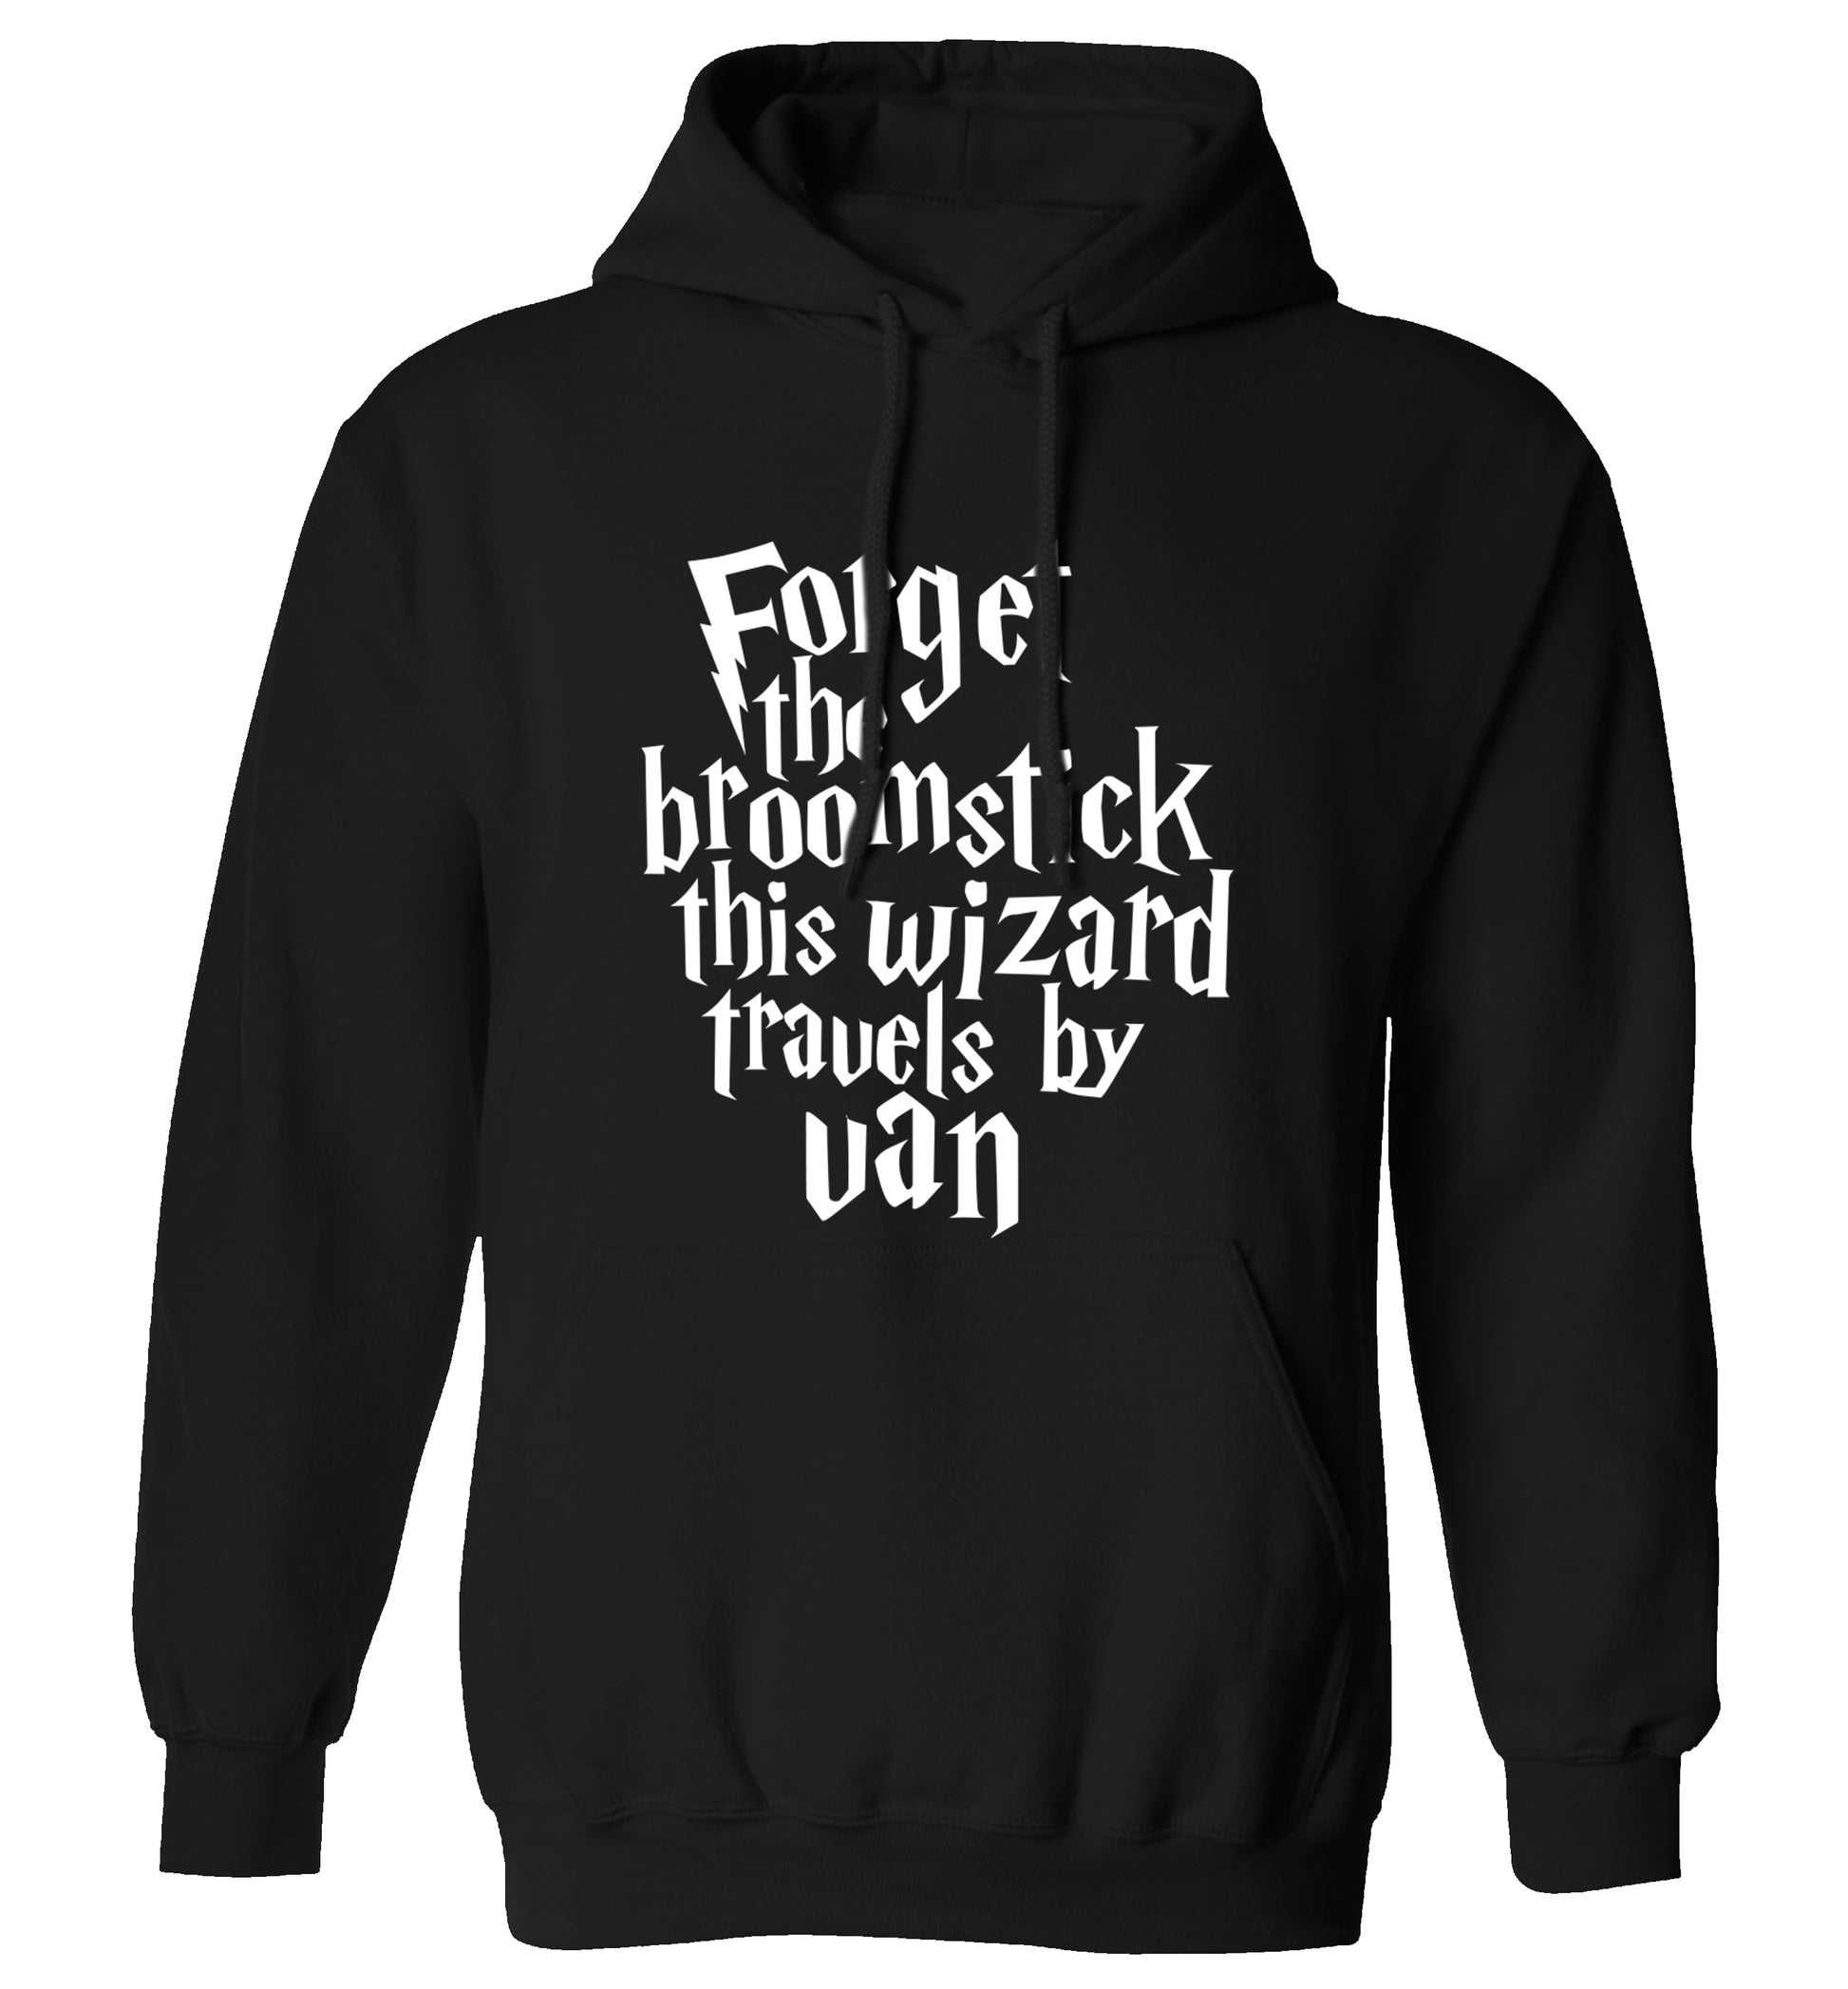 Forget the broomstick this wizard travels by van adults unisexblack hoodie 2XL